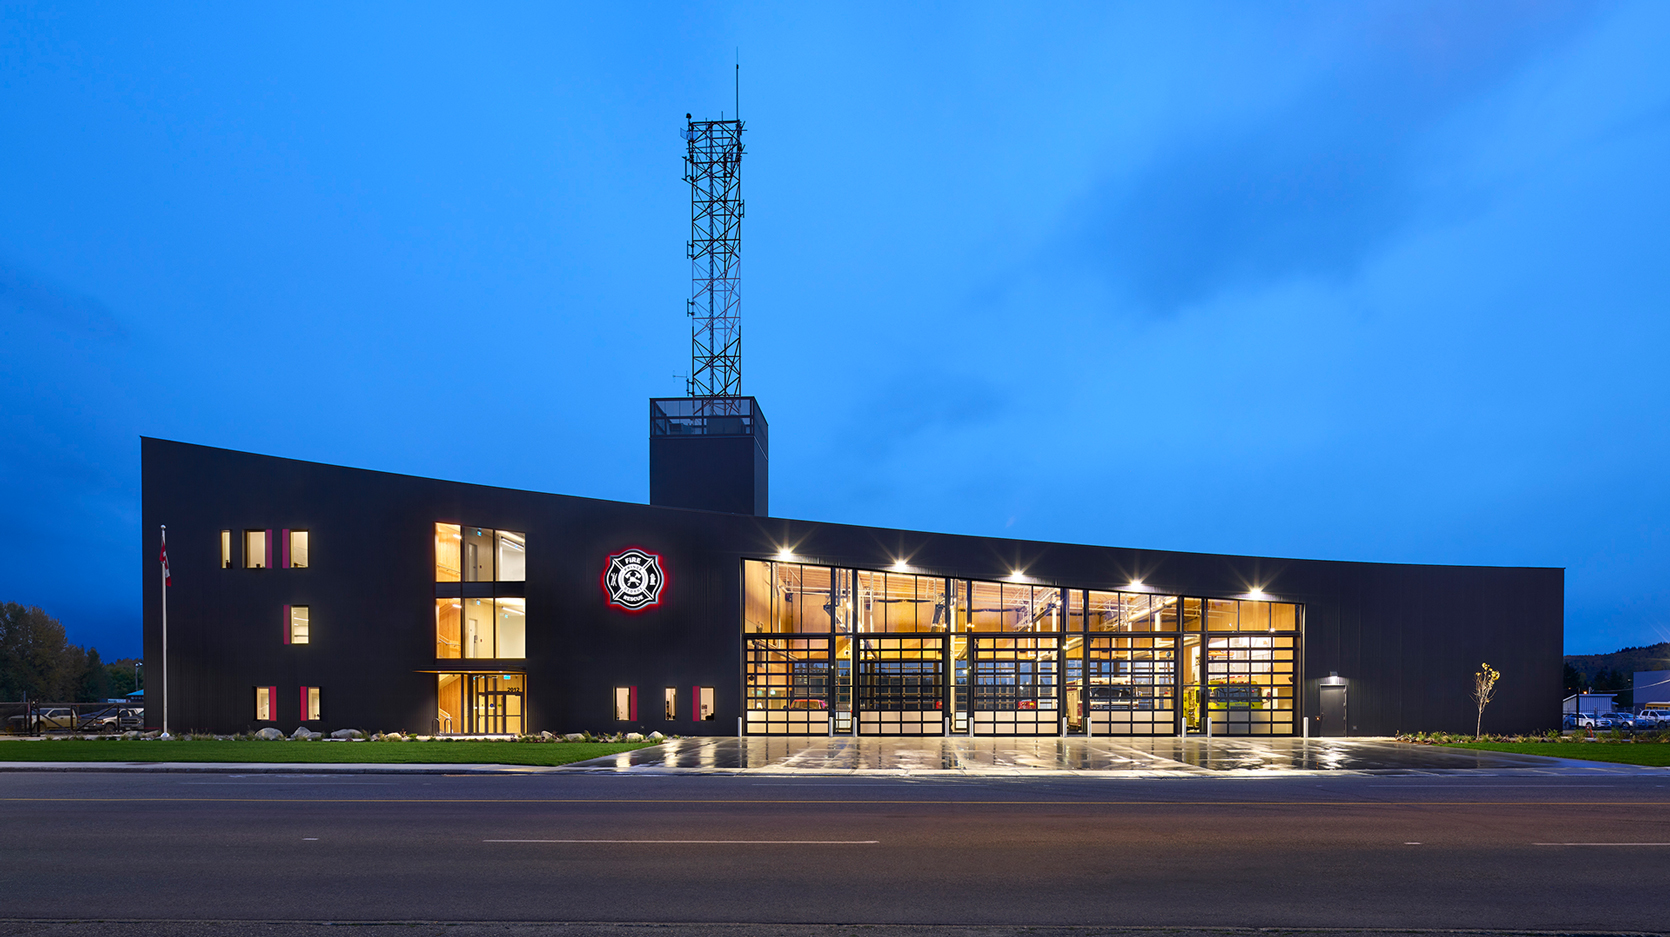 Street view of "Prince George Fire Hall #1" at night.